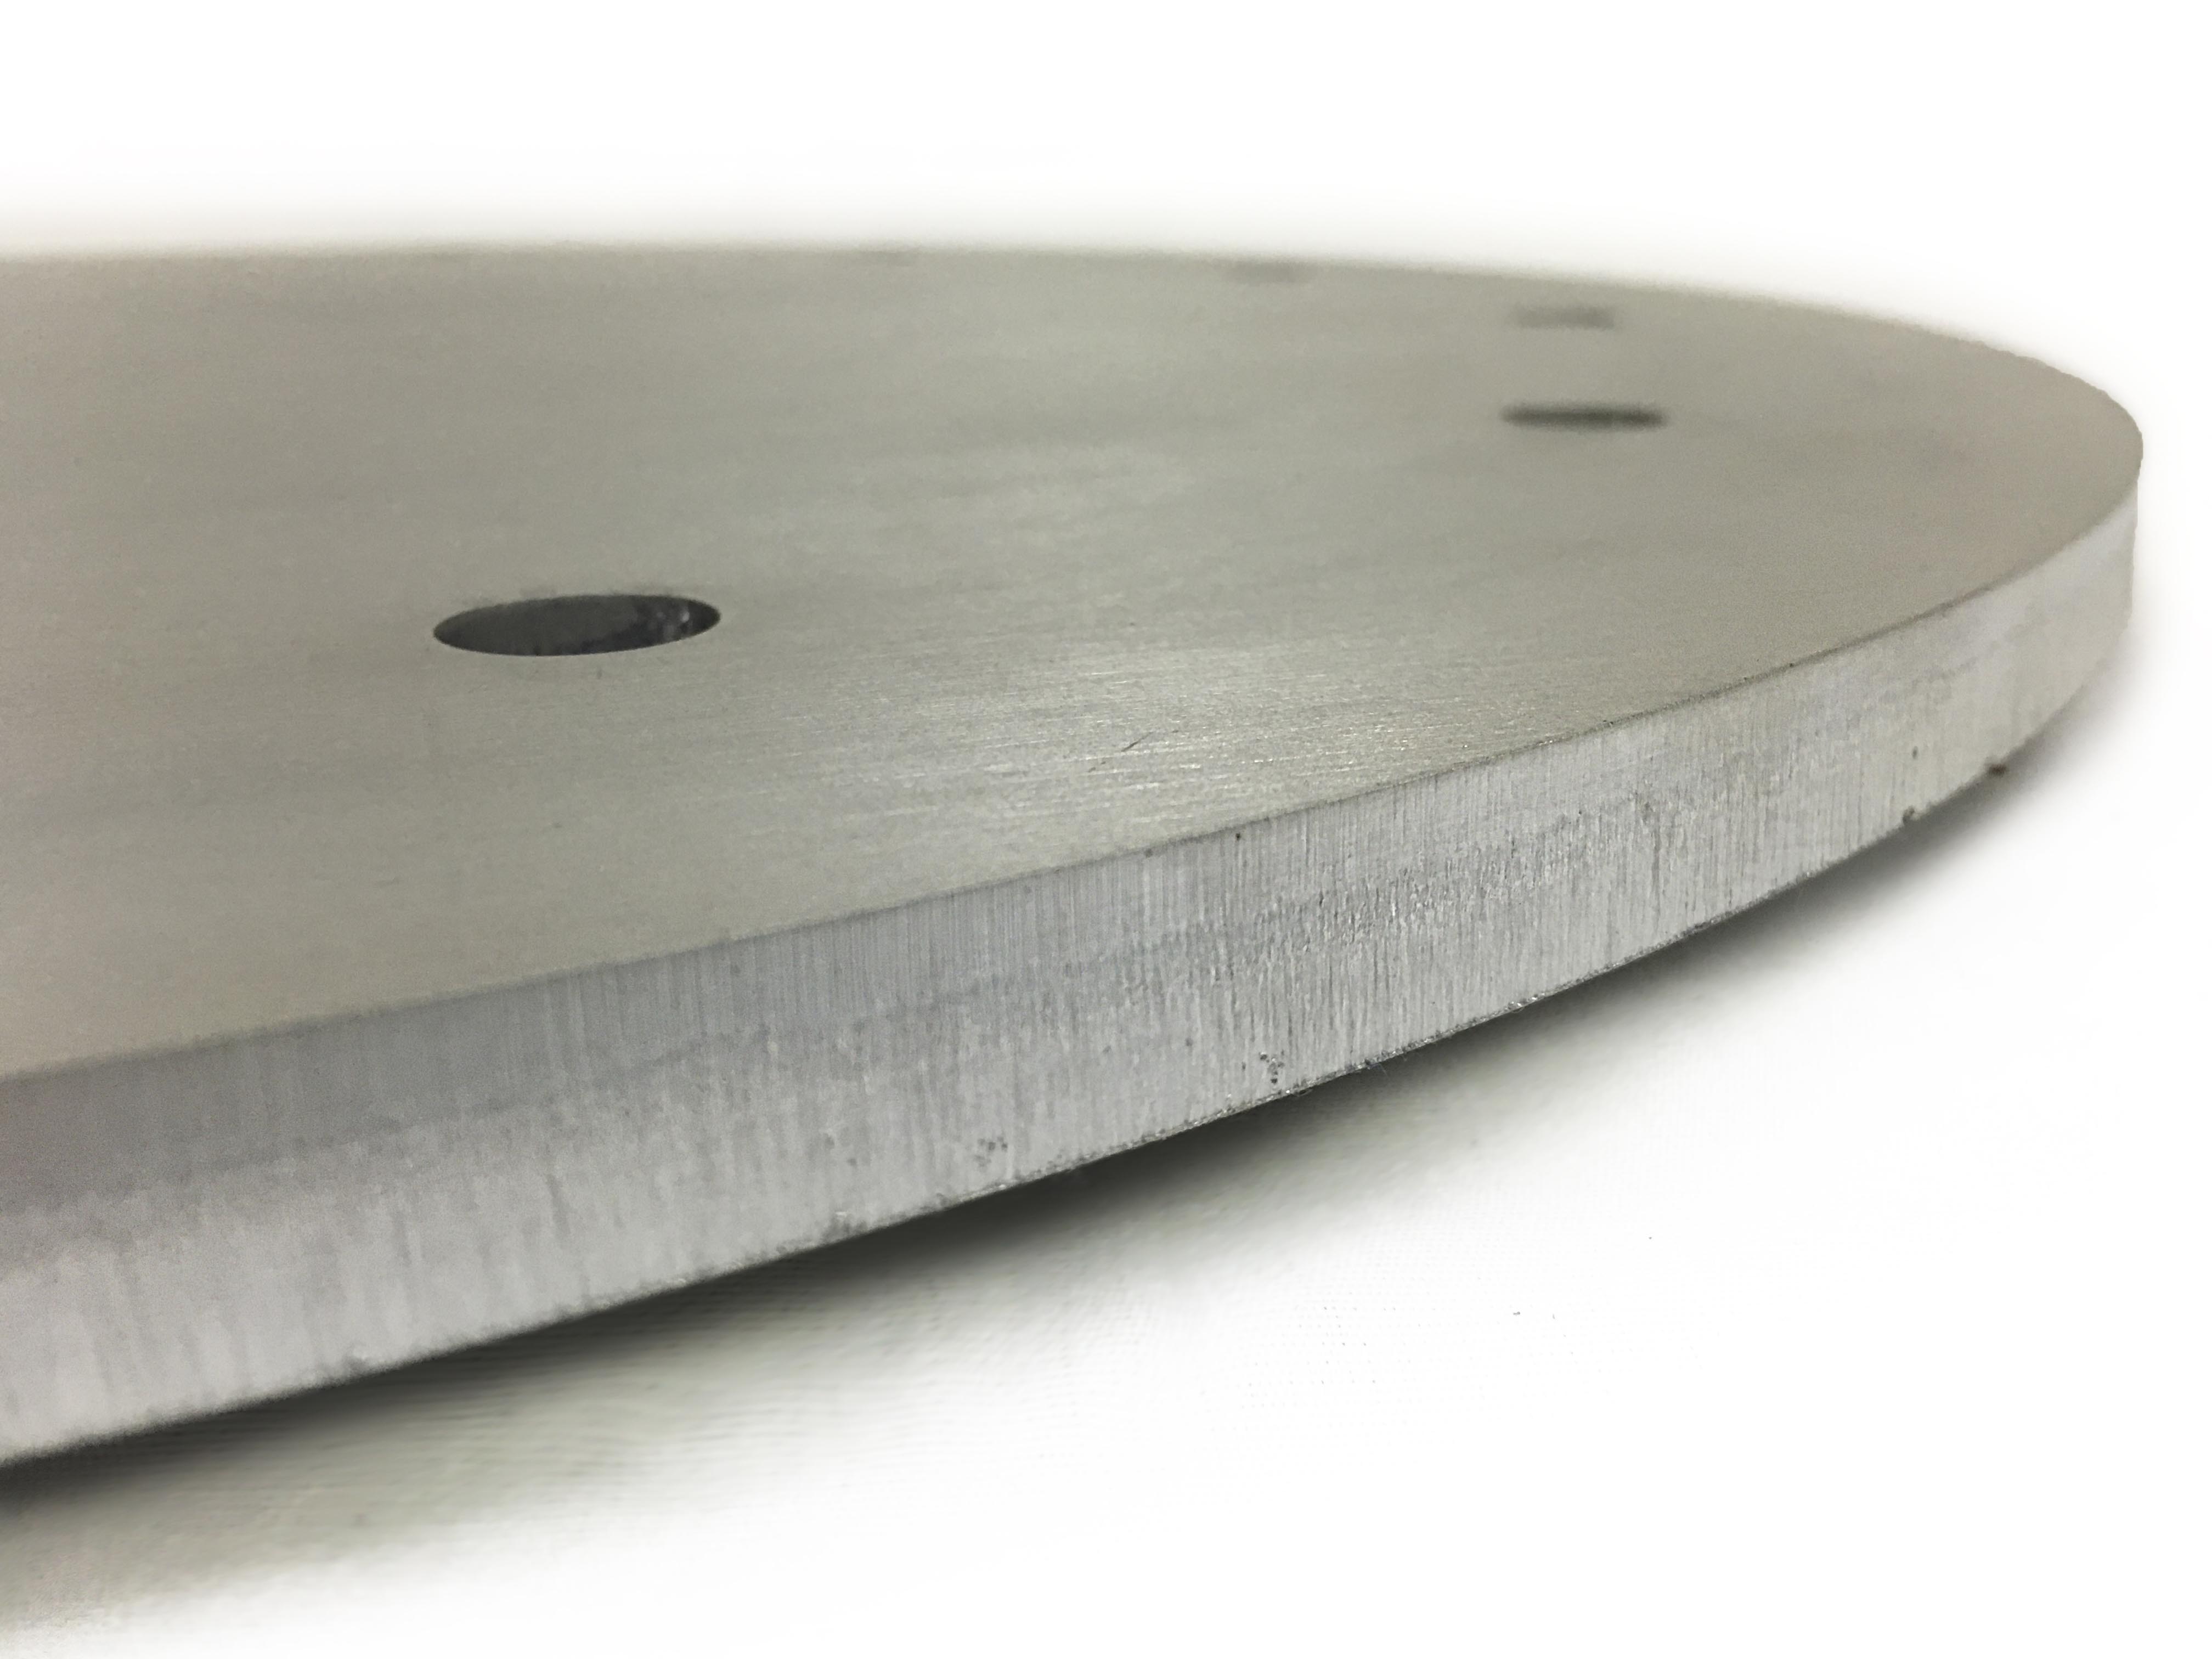 Aluminum - ½ in. flange with ⅝ in. clearance holes